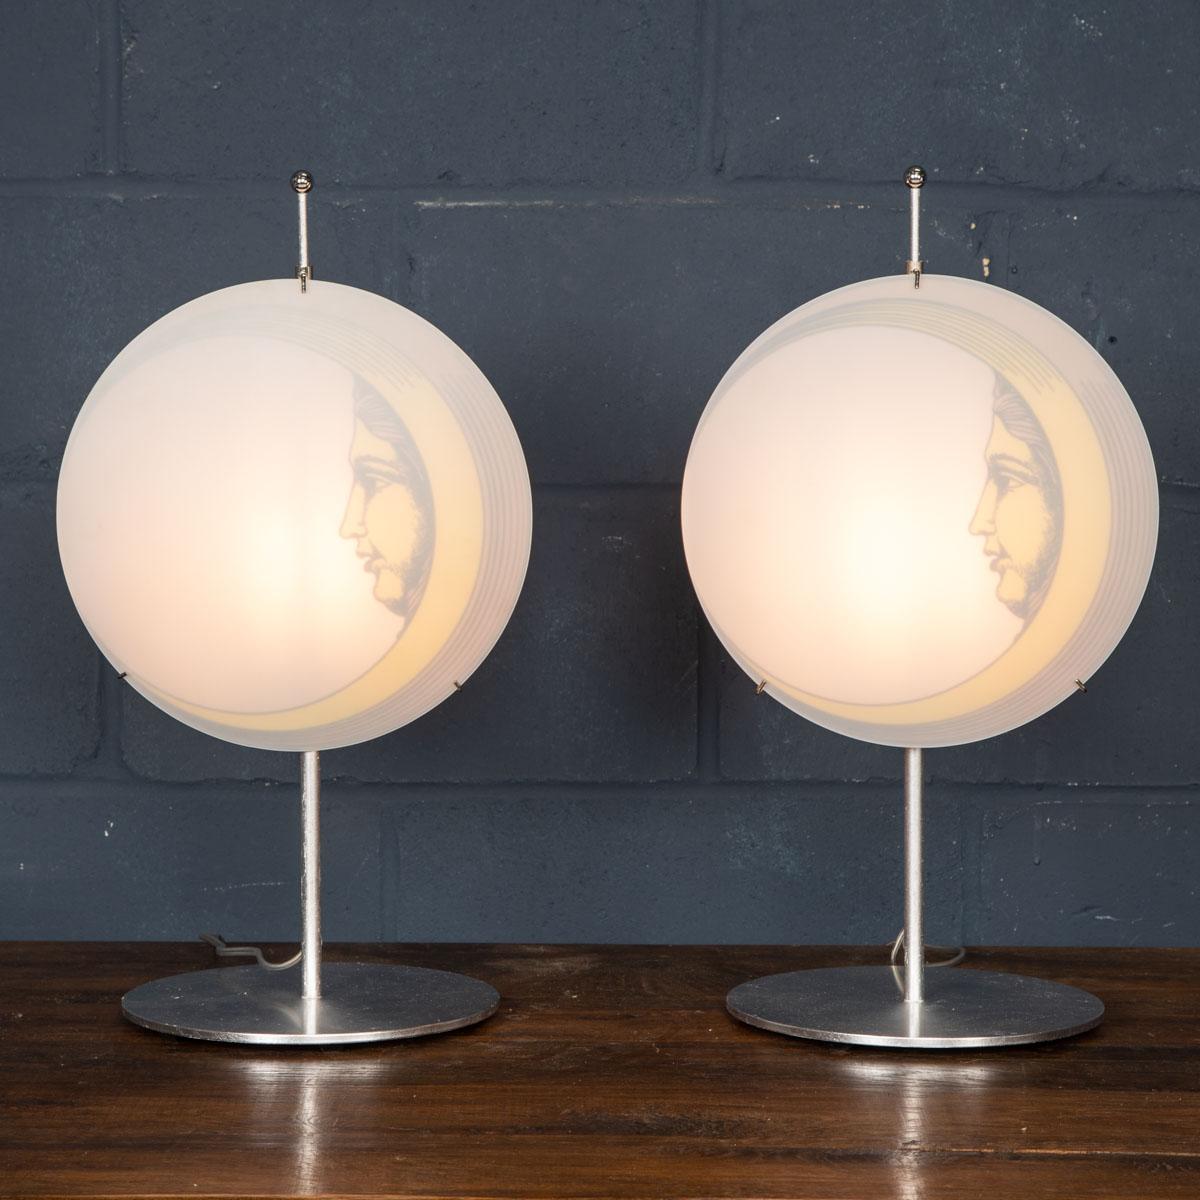 A beautiful pair of table lamps by Piero Fornasetti. This particular model retailed by Antonangeli in the 1990s, now discontinued and appreciating in value. More importantly it gives any room a very chic twist on lighting with its frame supporting a